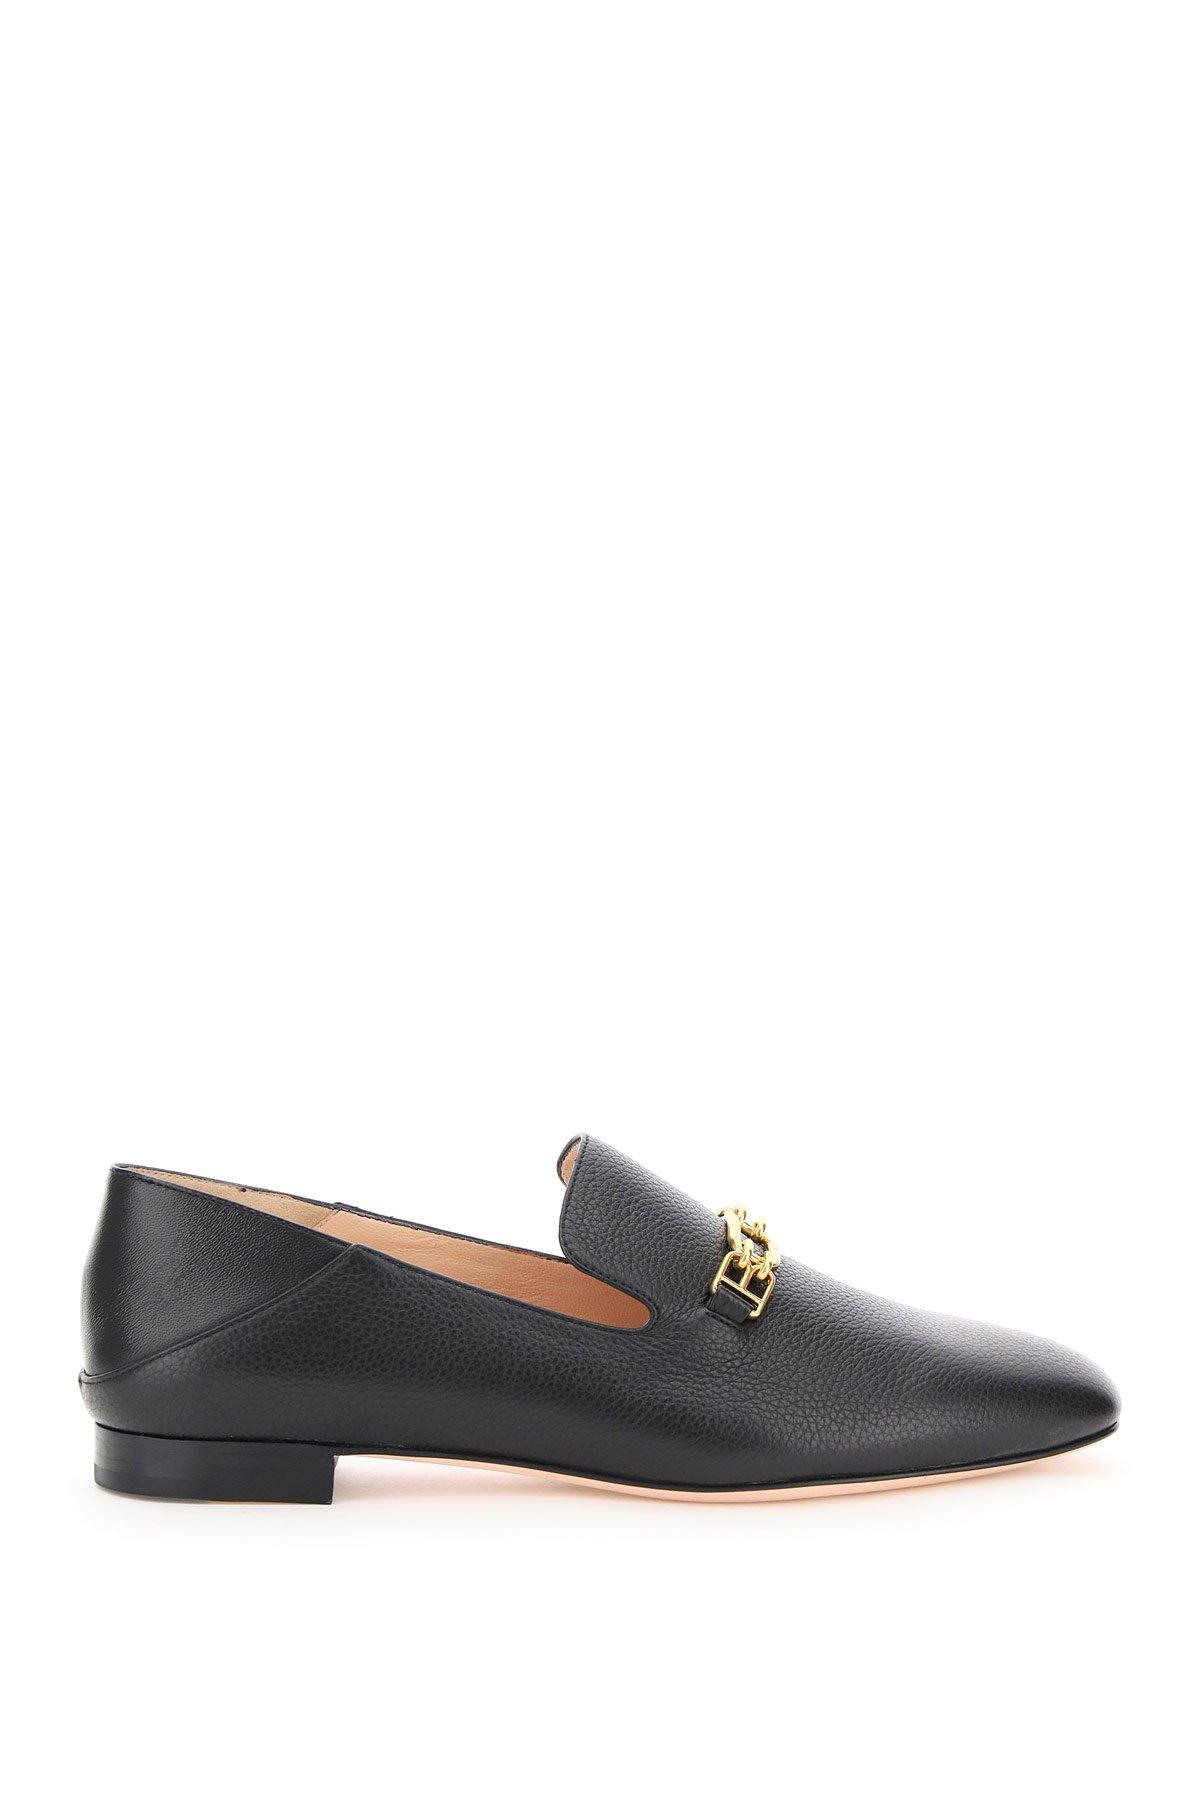 Bally Darcie 1851 Loafers in Black | Lyst